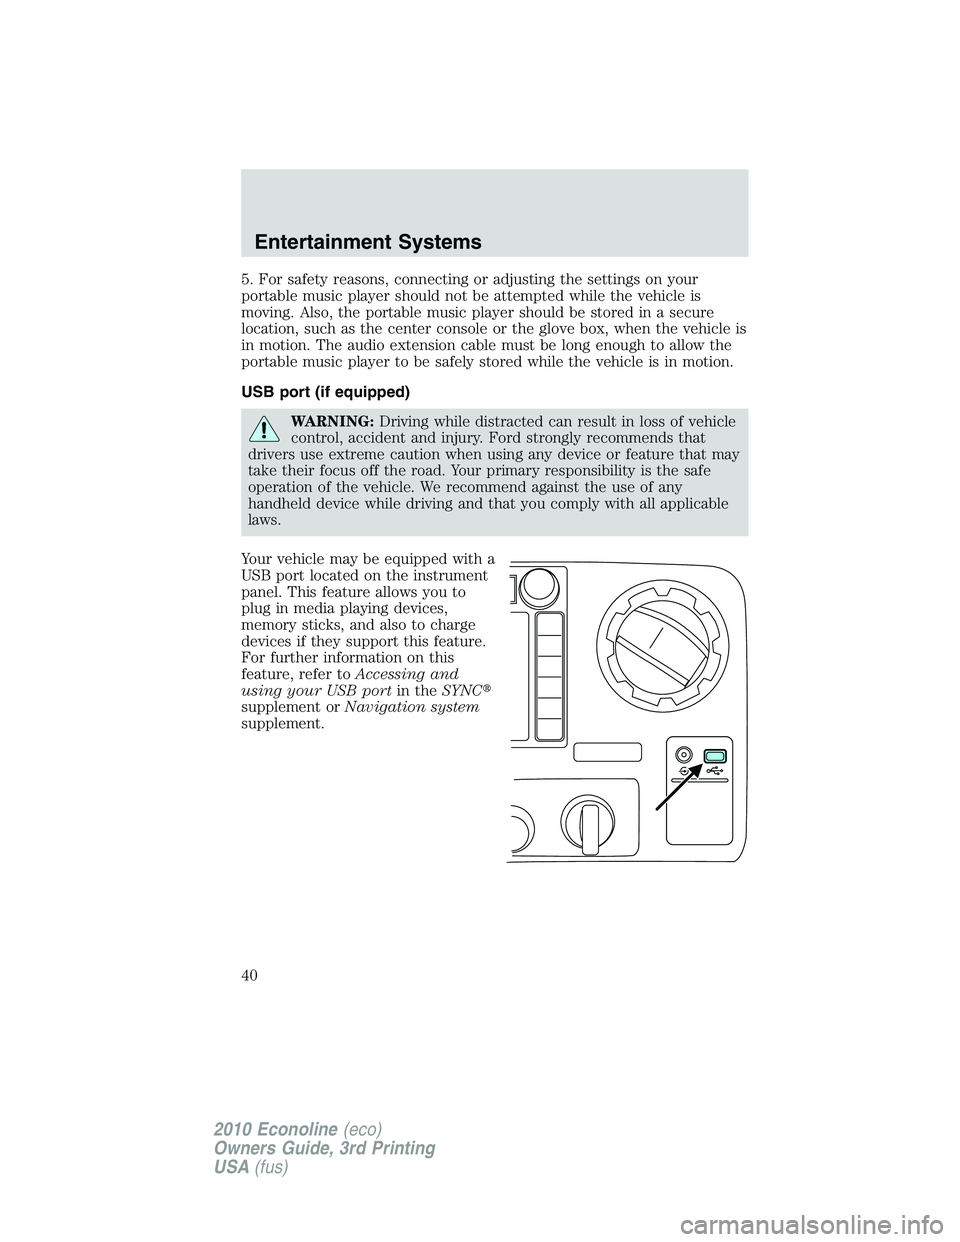 FORD E450 2010  Owners Manual 5. For safety reasons, connecting or adjusting the settings on your
portable music player should not be attempted while the vehicle is
moving. Also, the portable music player should be stored in a sec